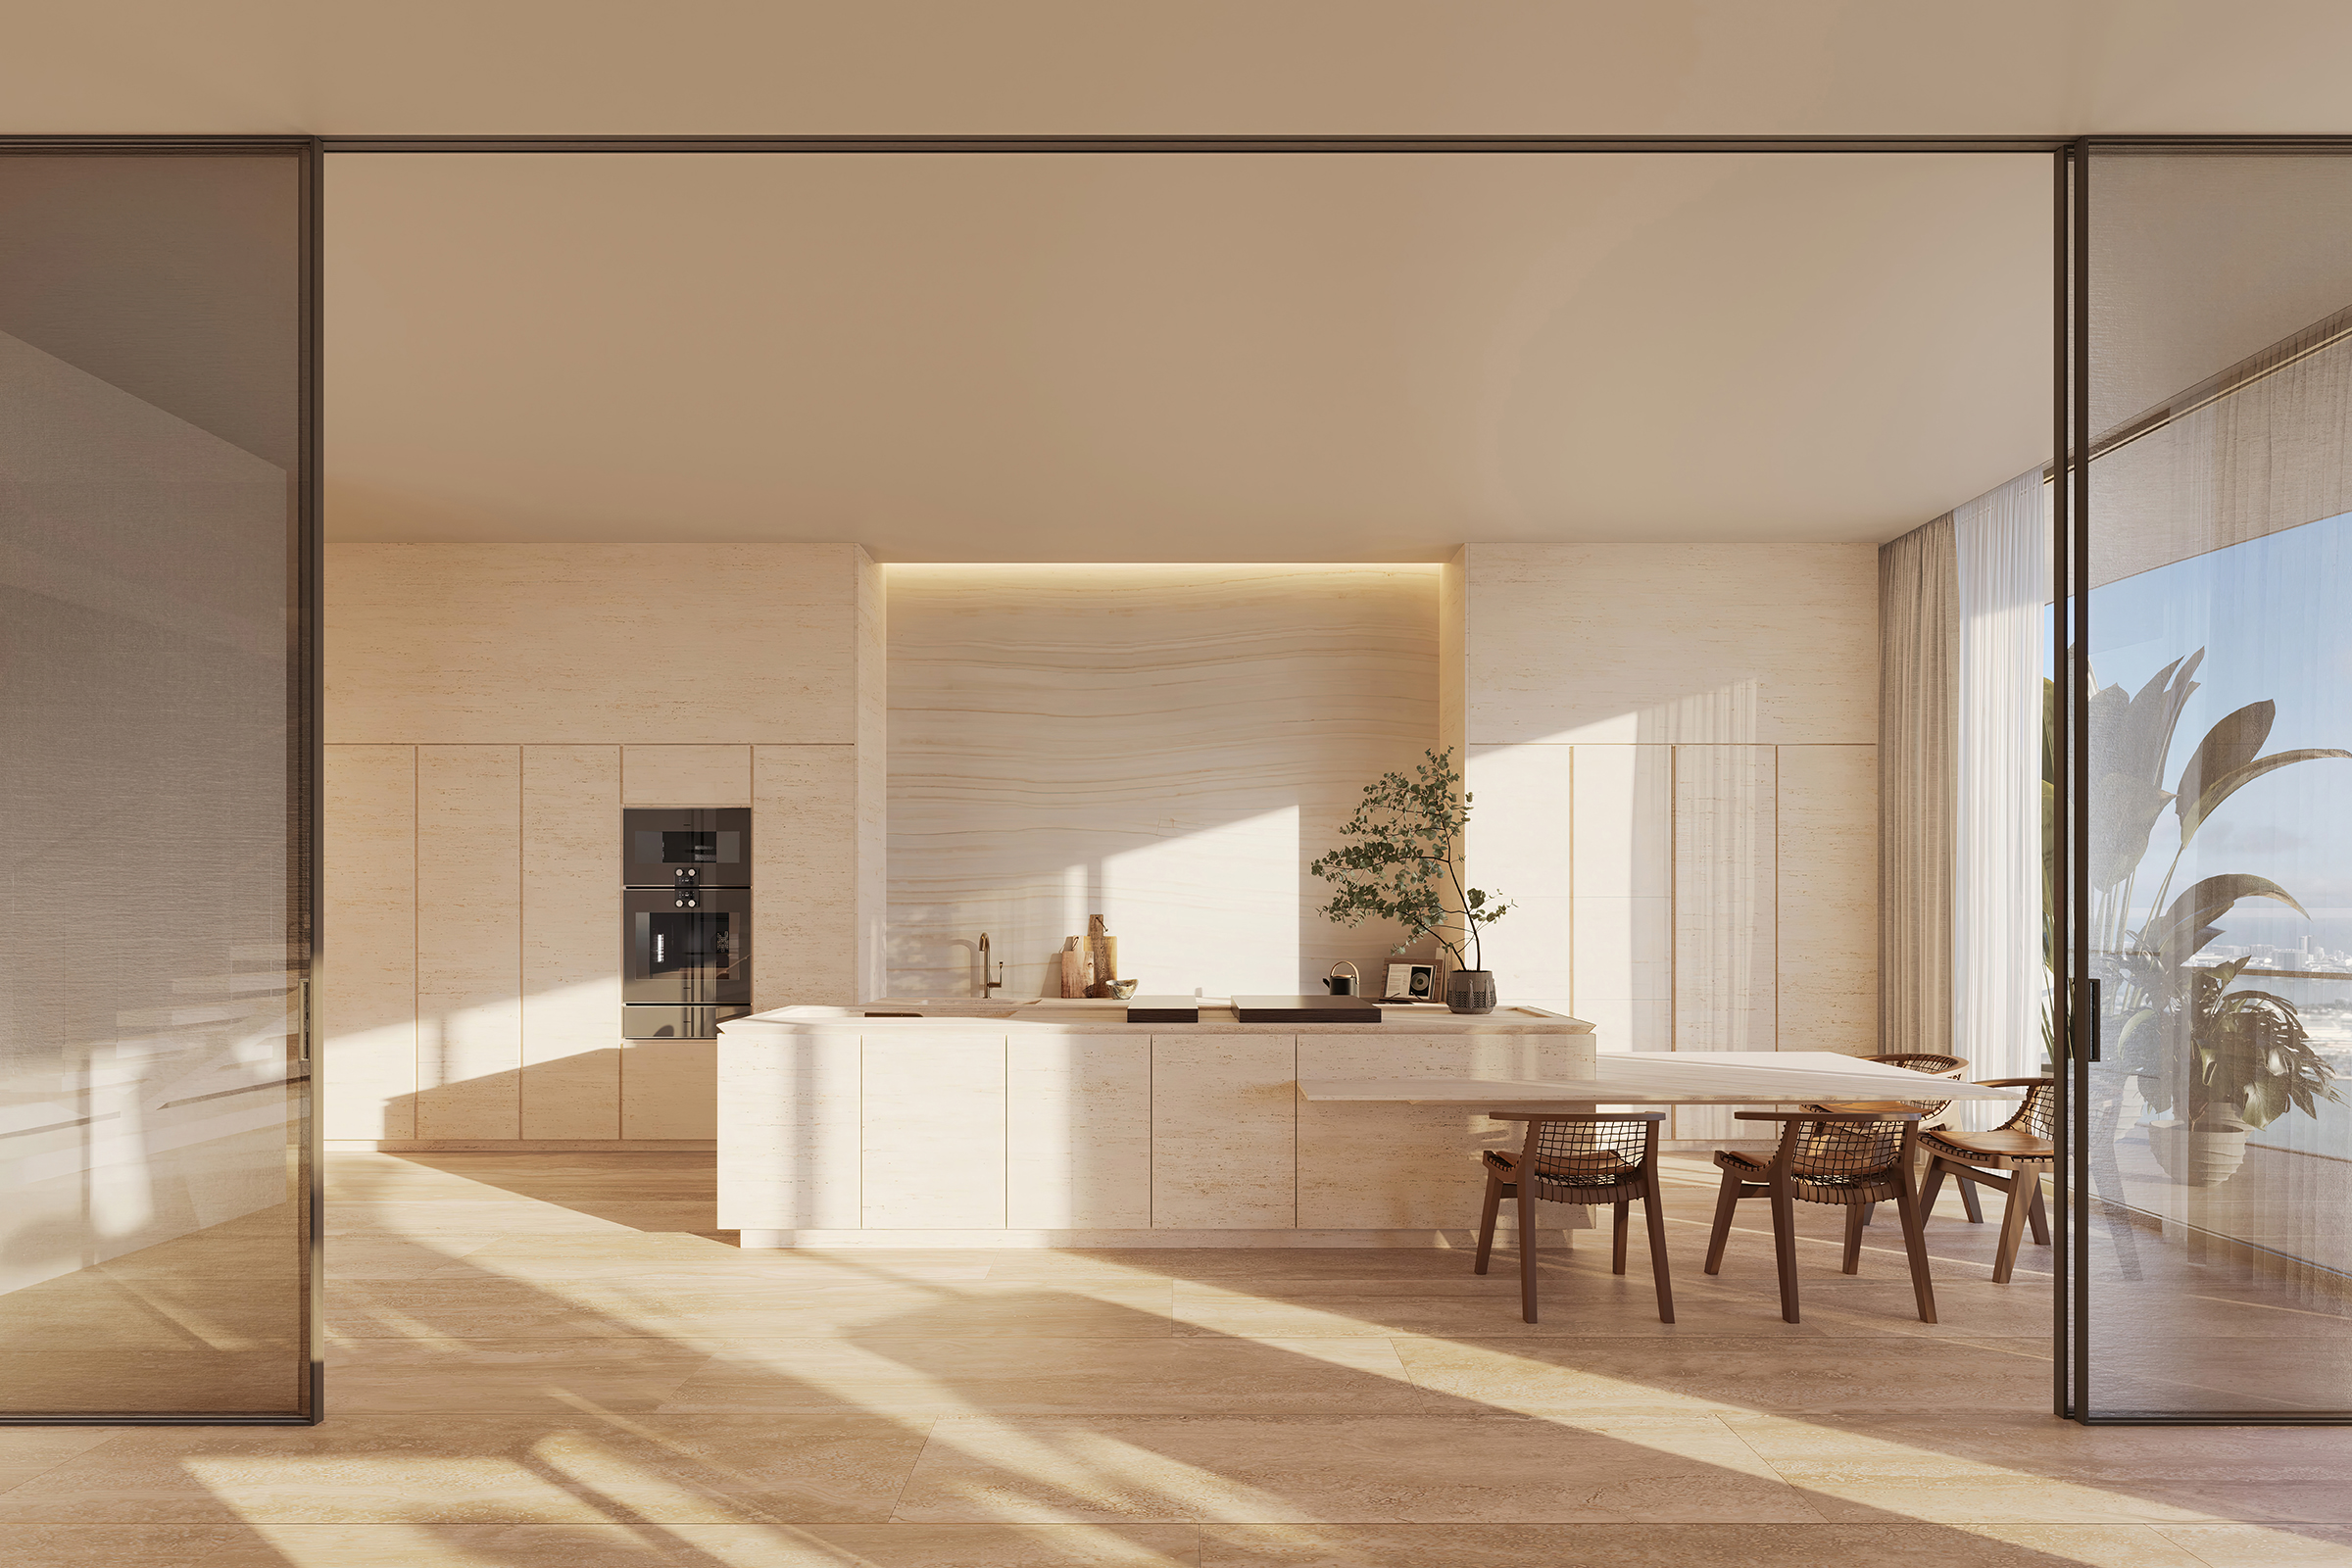 Rendering of The Residences at 1428 Brickell Kitchen